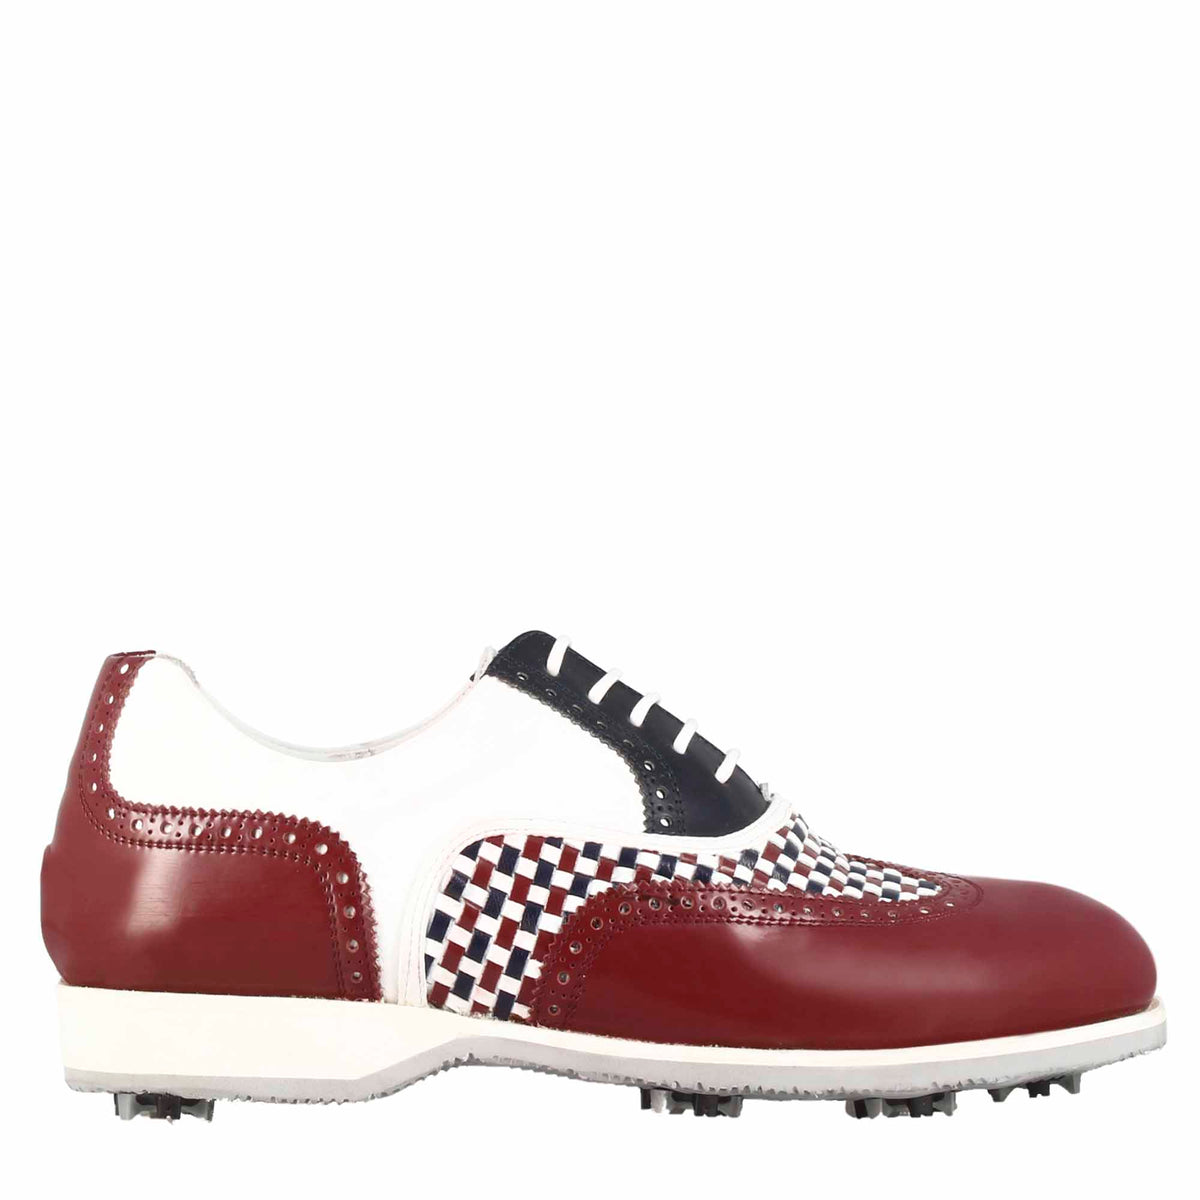 Handcrafted men's golf shoes in white leather with blue and burgundy details